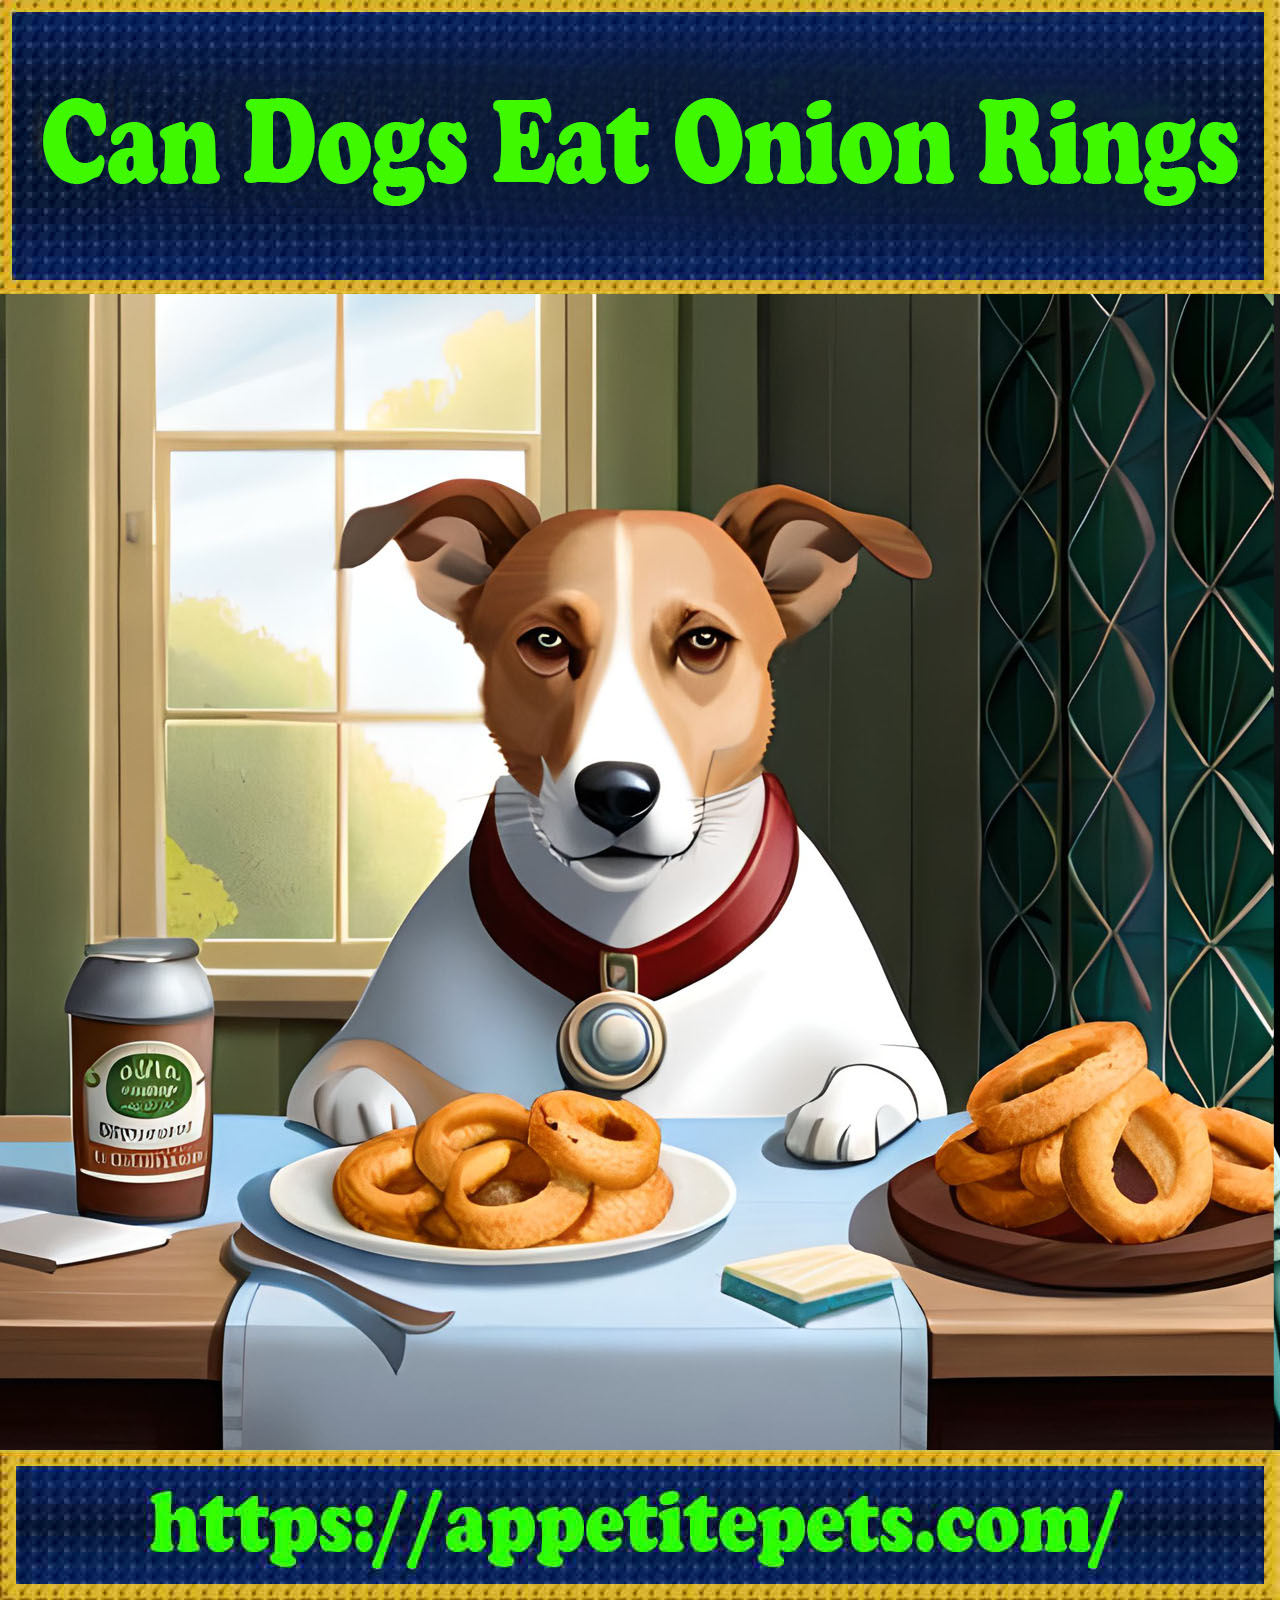 Can Dogs Eat Onion Rings?